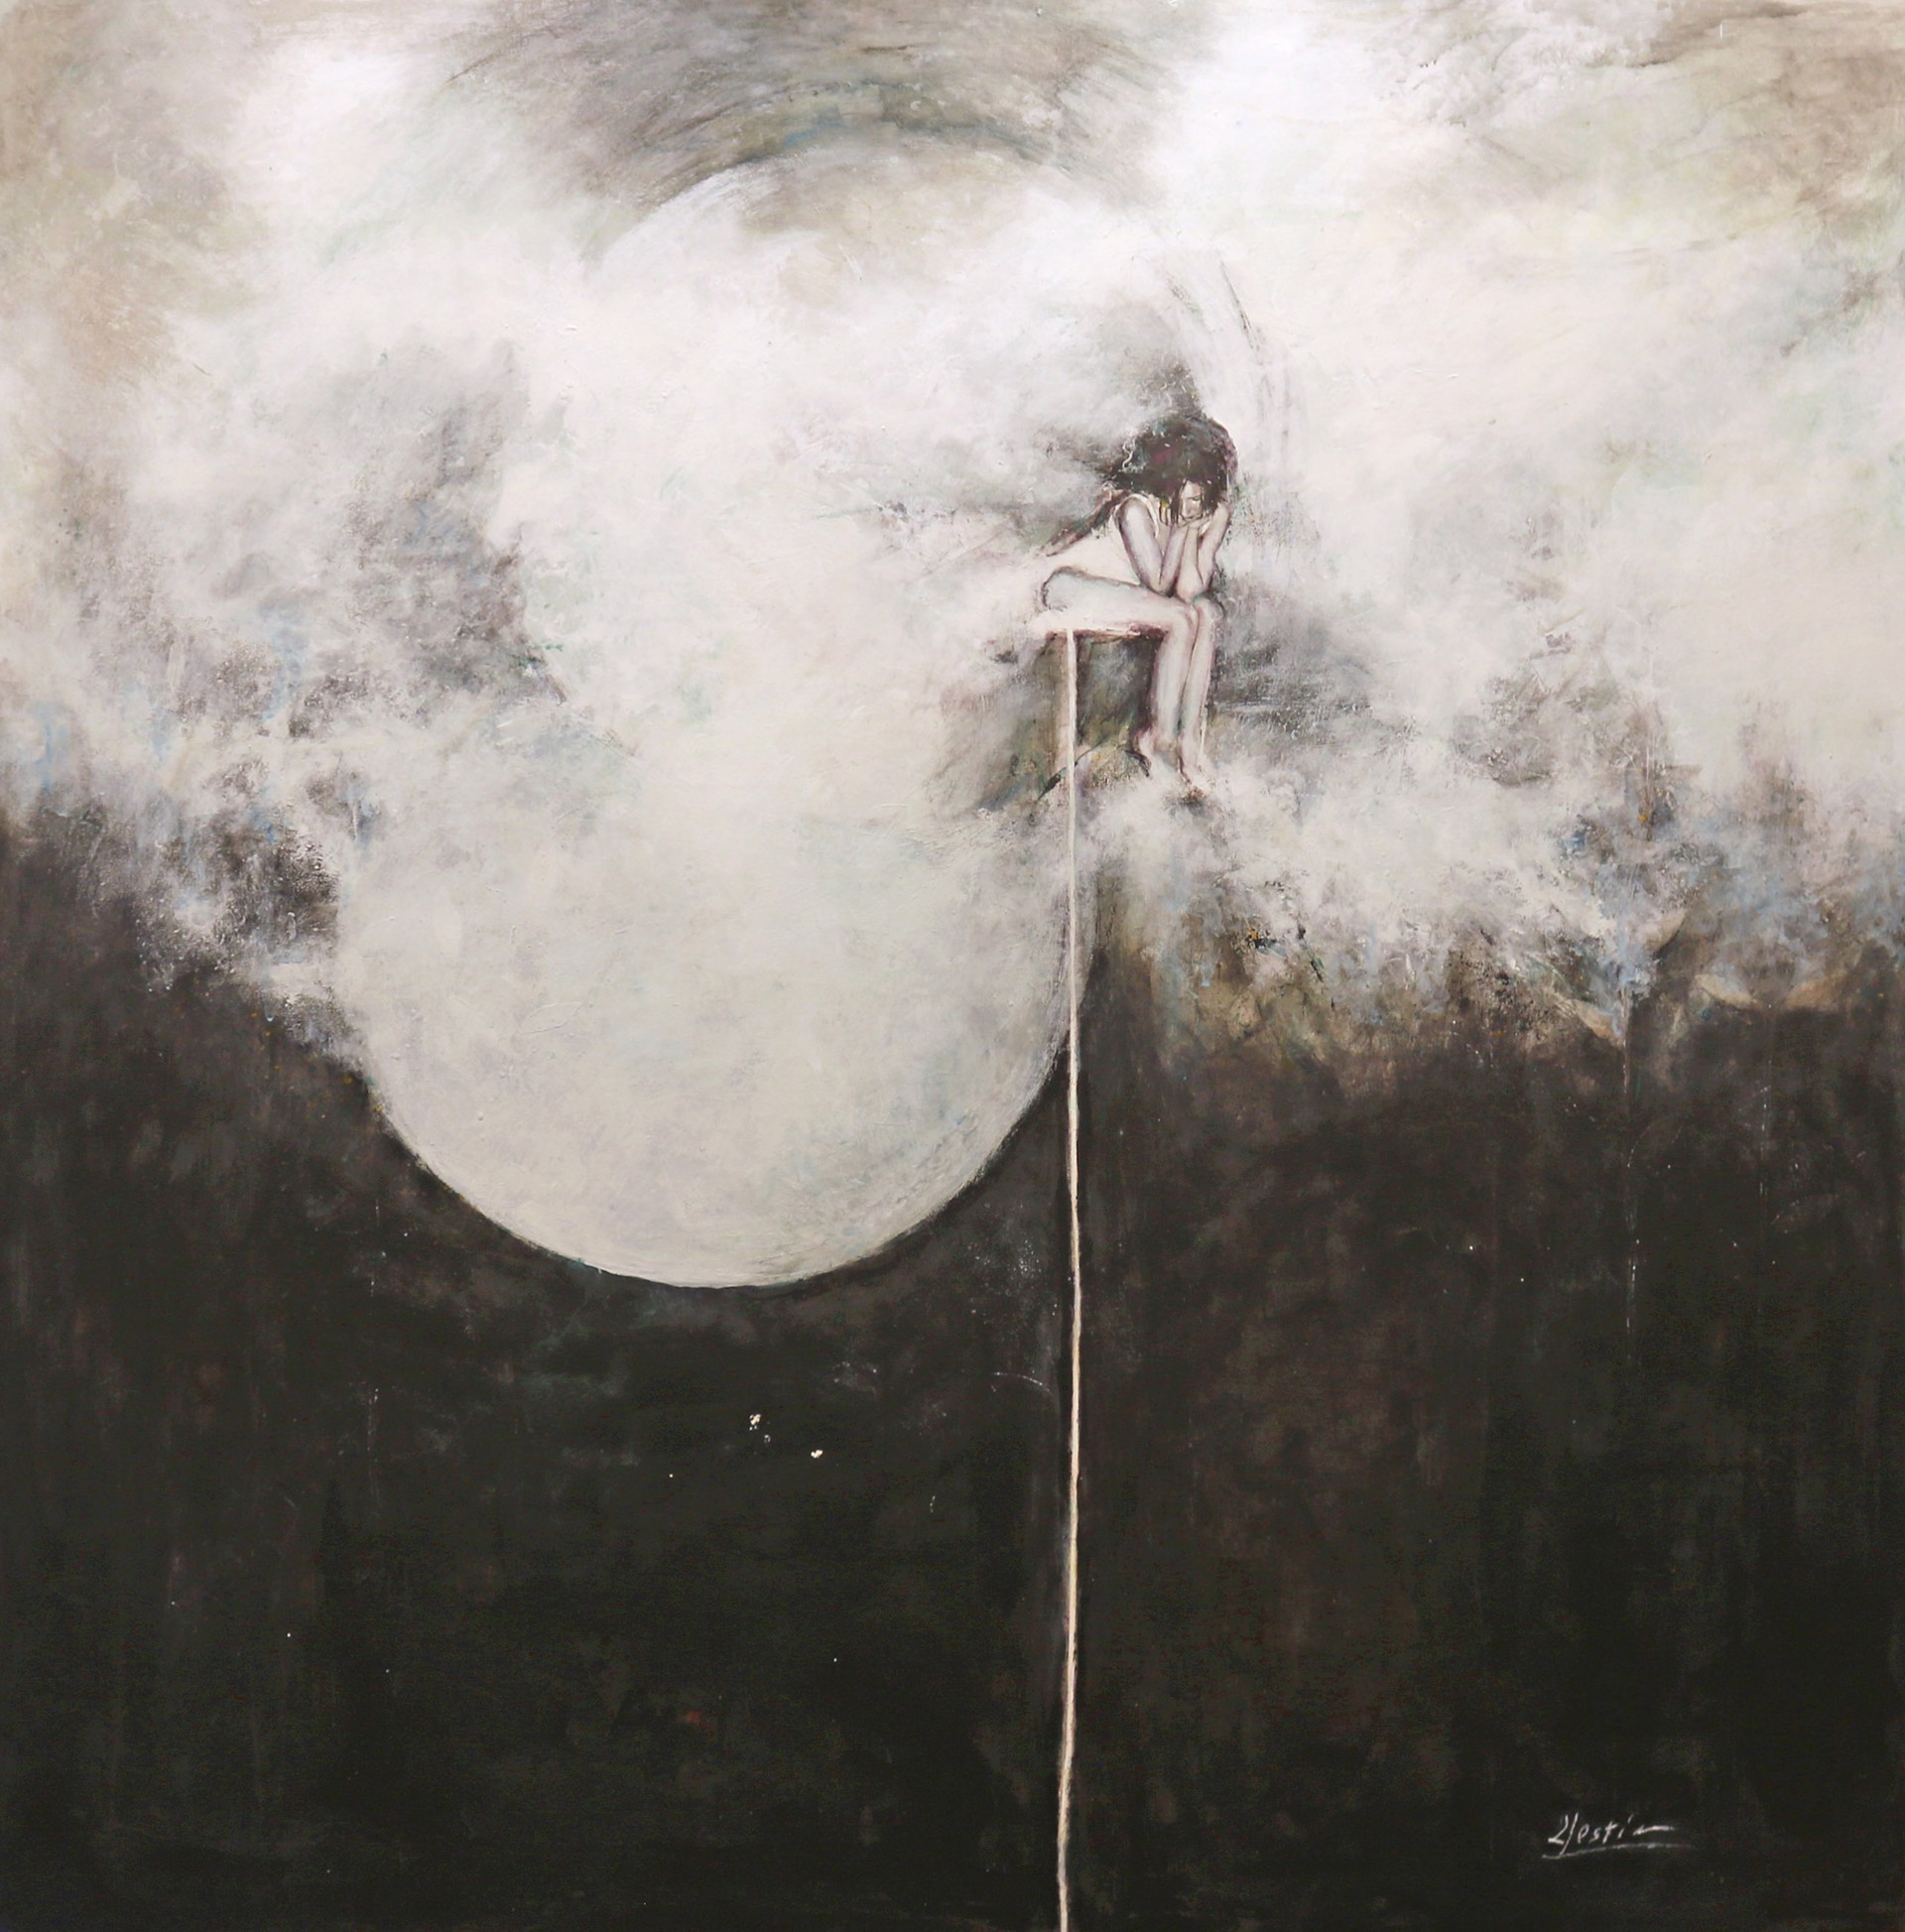 Untitled - Woman & Moon by Ana Llestin